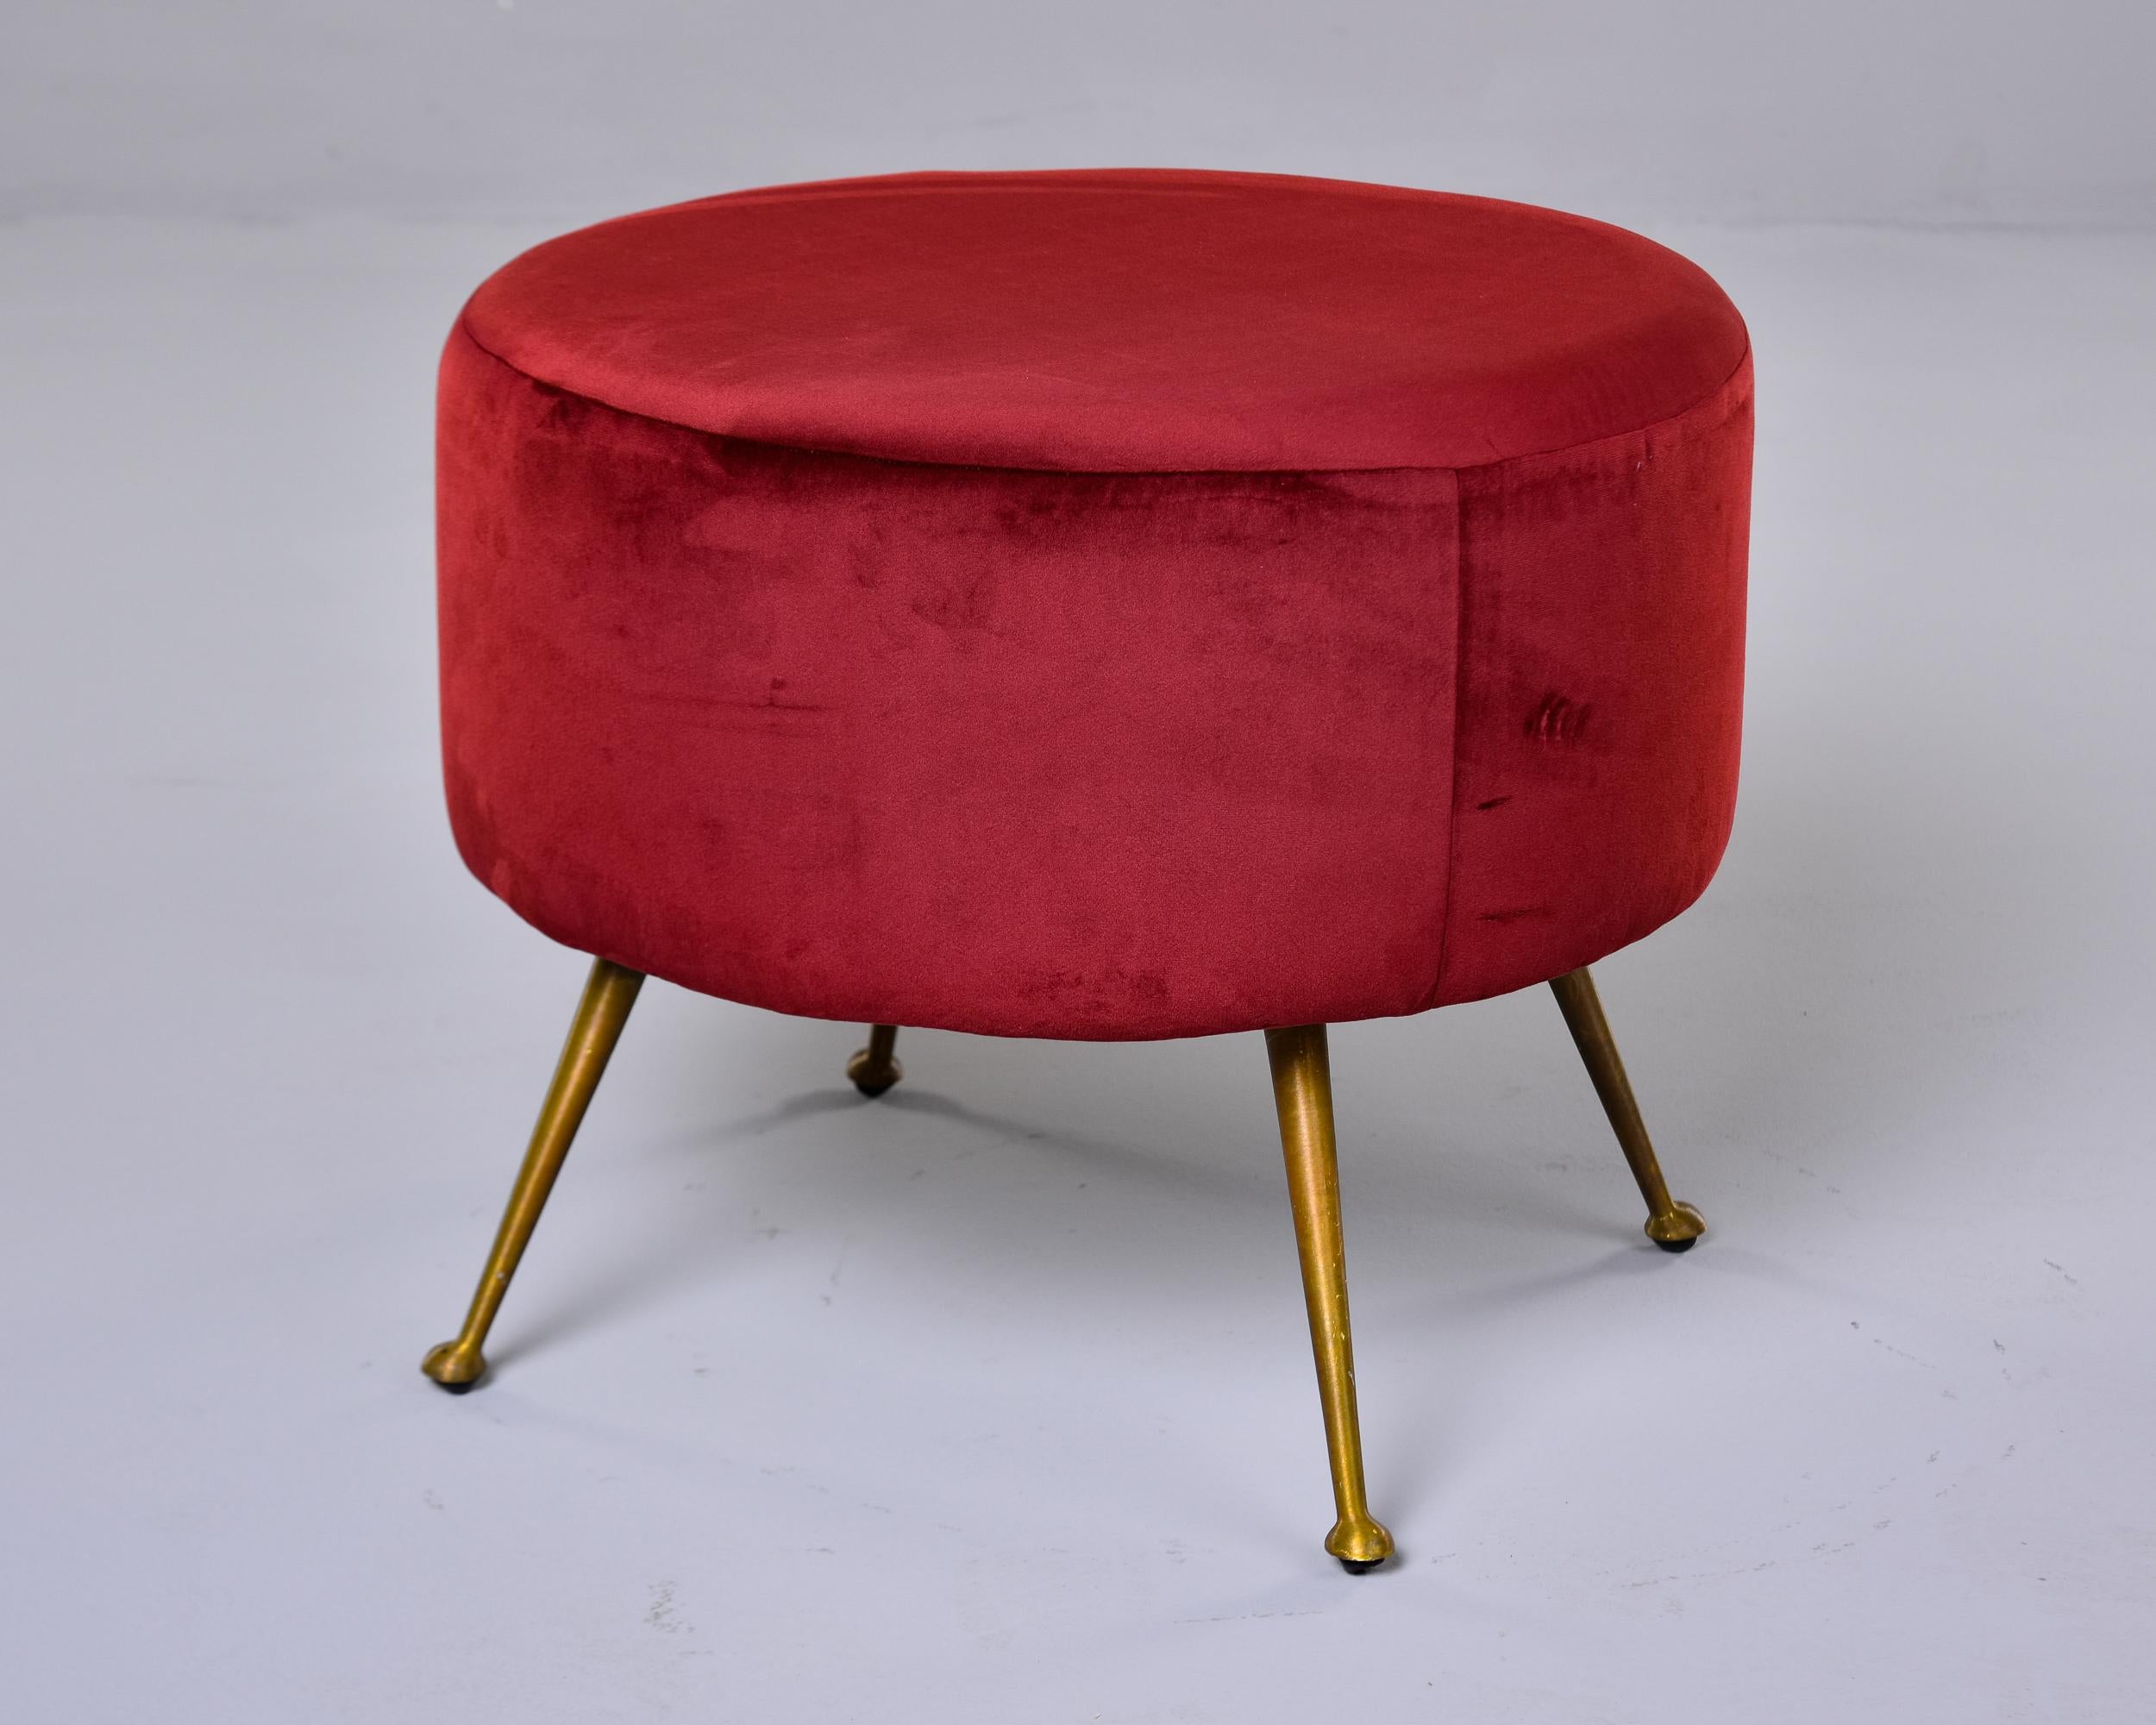 Italian Midcentury Round Stool with Red Upholstery and Brass Legs For Sale 2